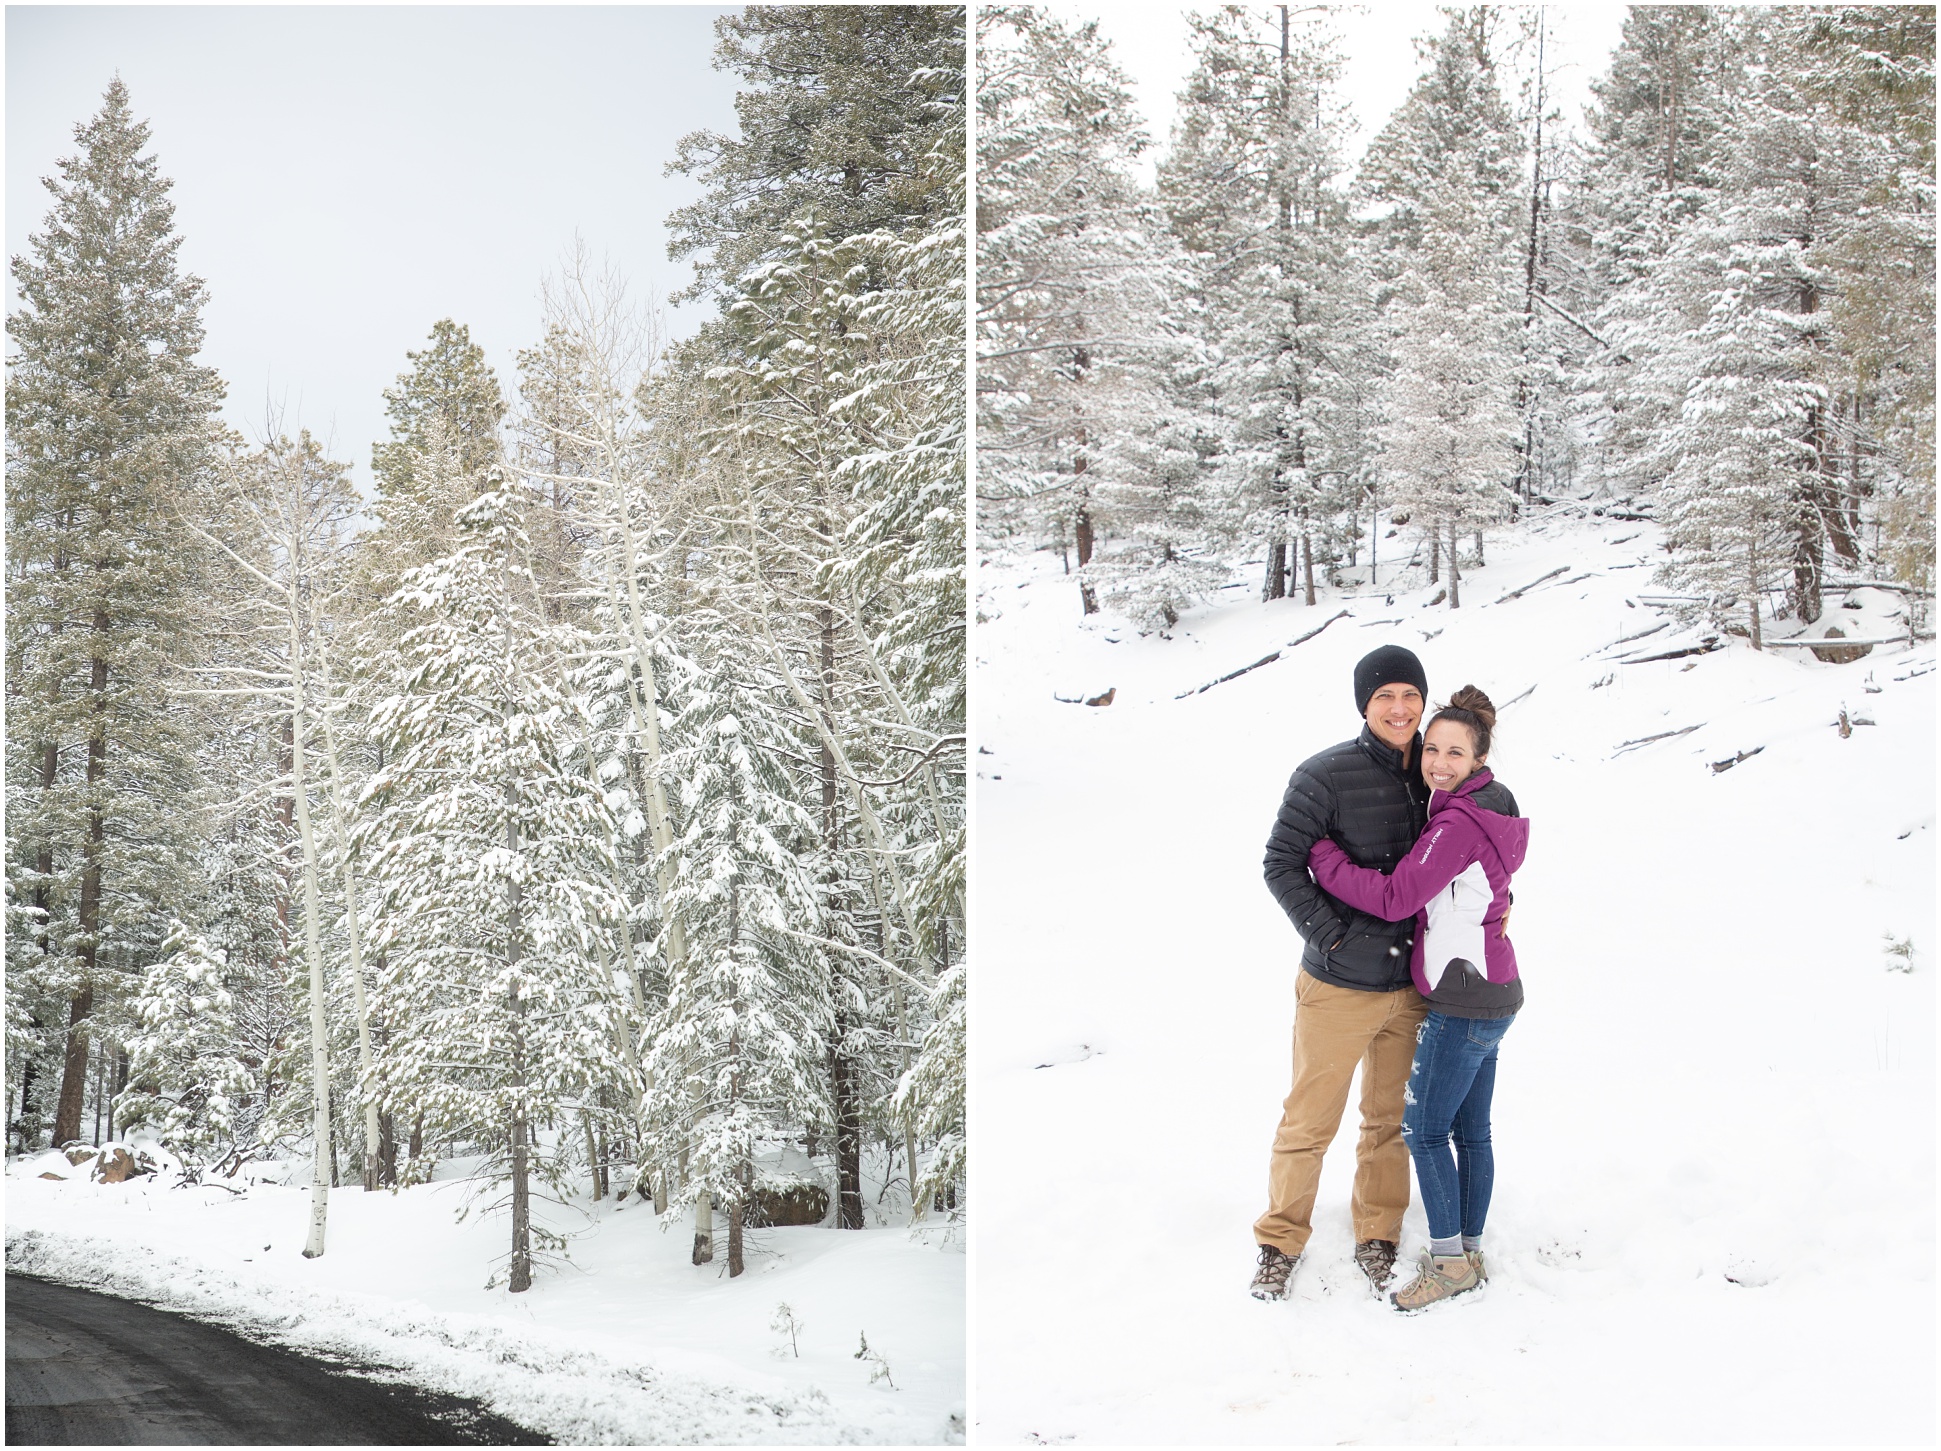 Left image: Snowy trees, right image: Michael and Jessica in the snow at snow bowl